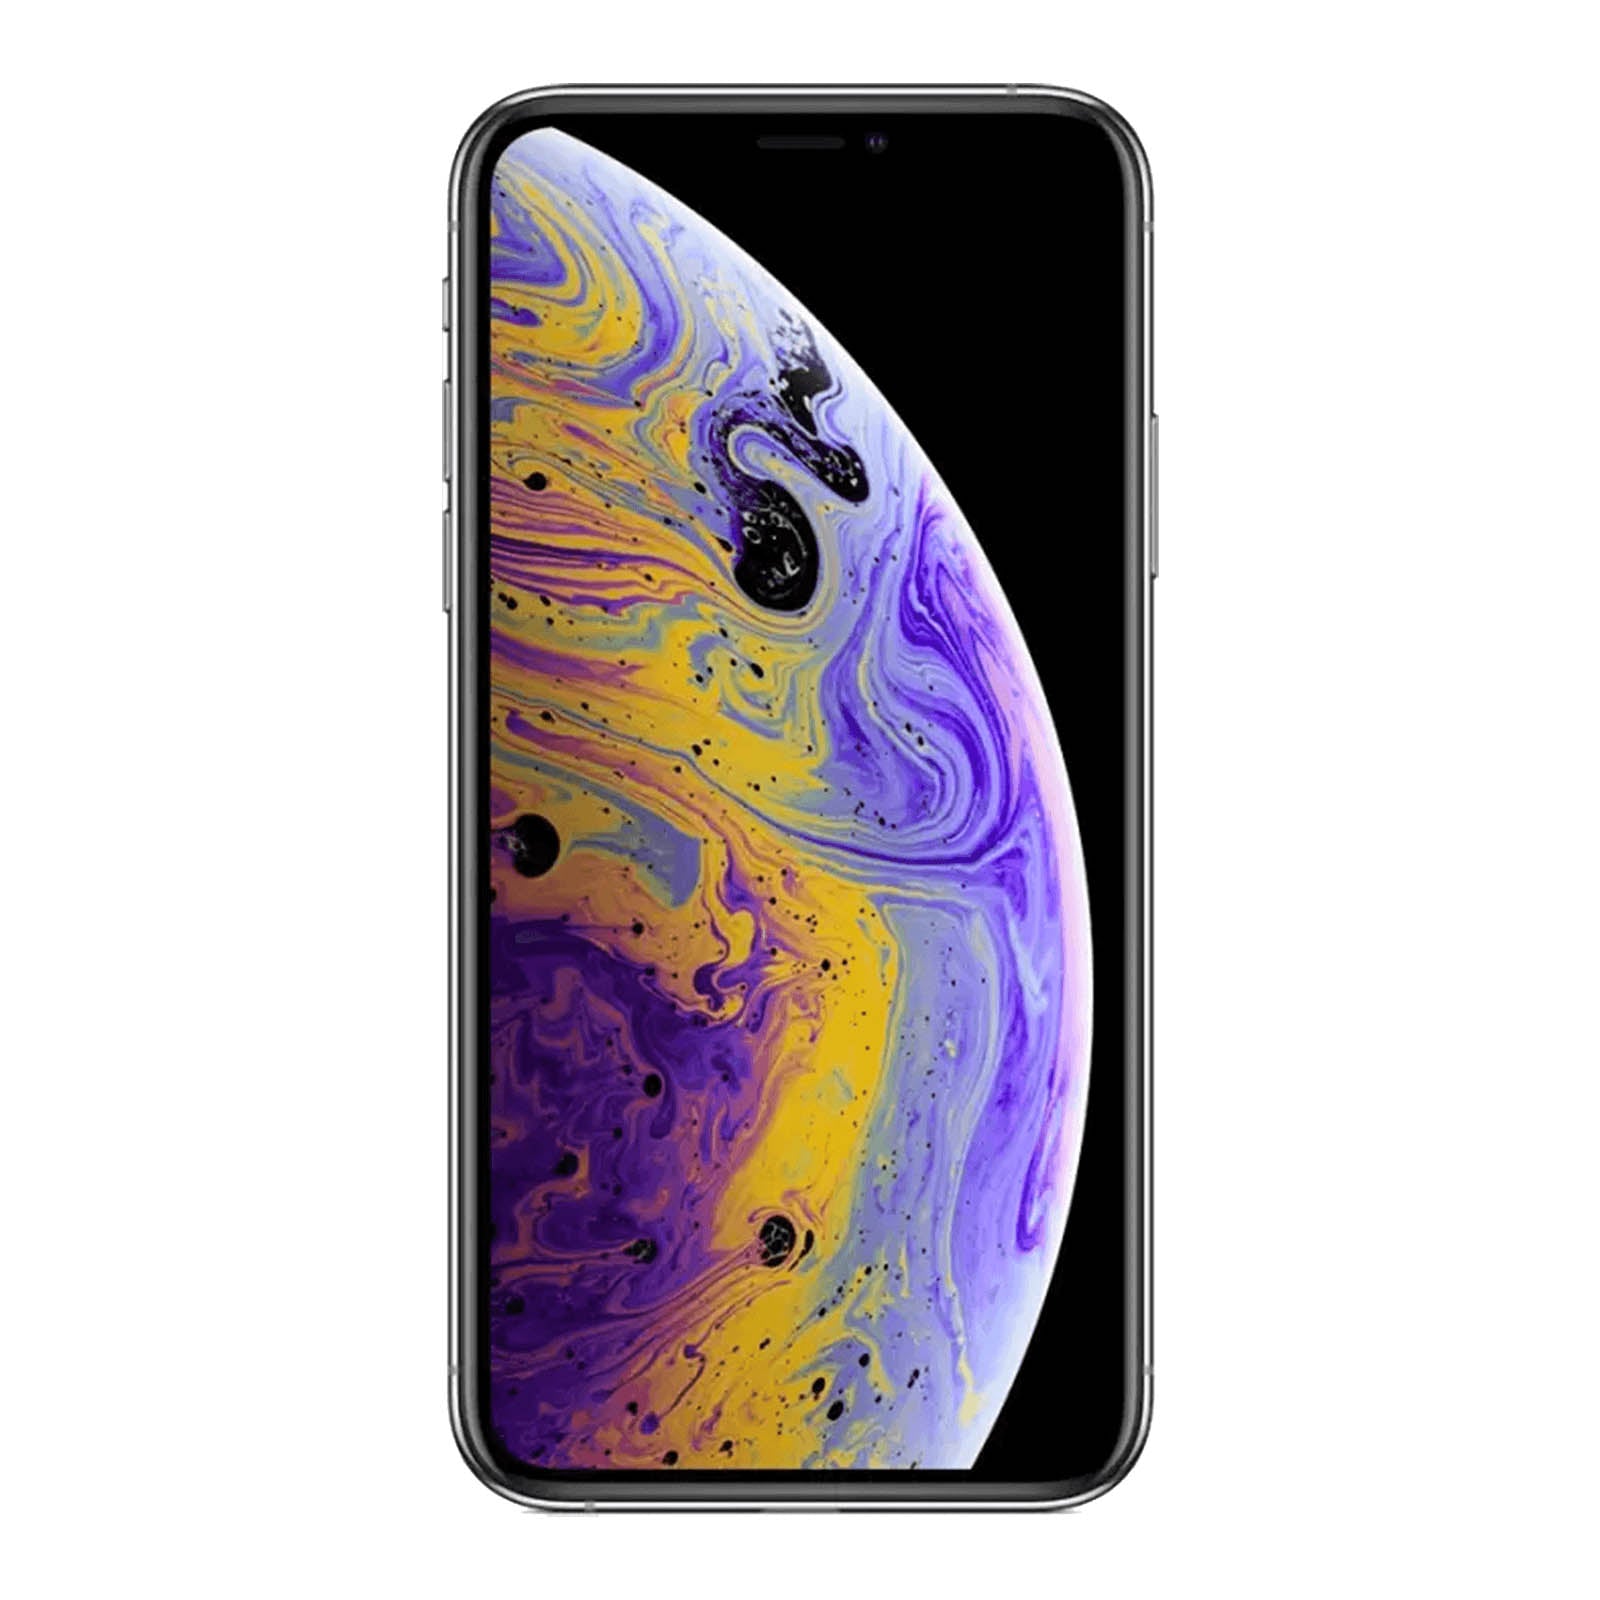 Apple iPhone XS Max 512GB Silver Very Good - AT&T